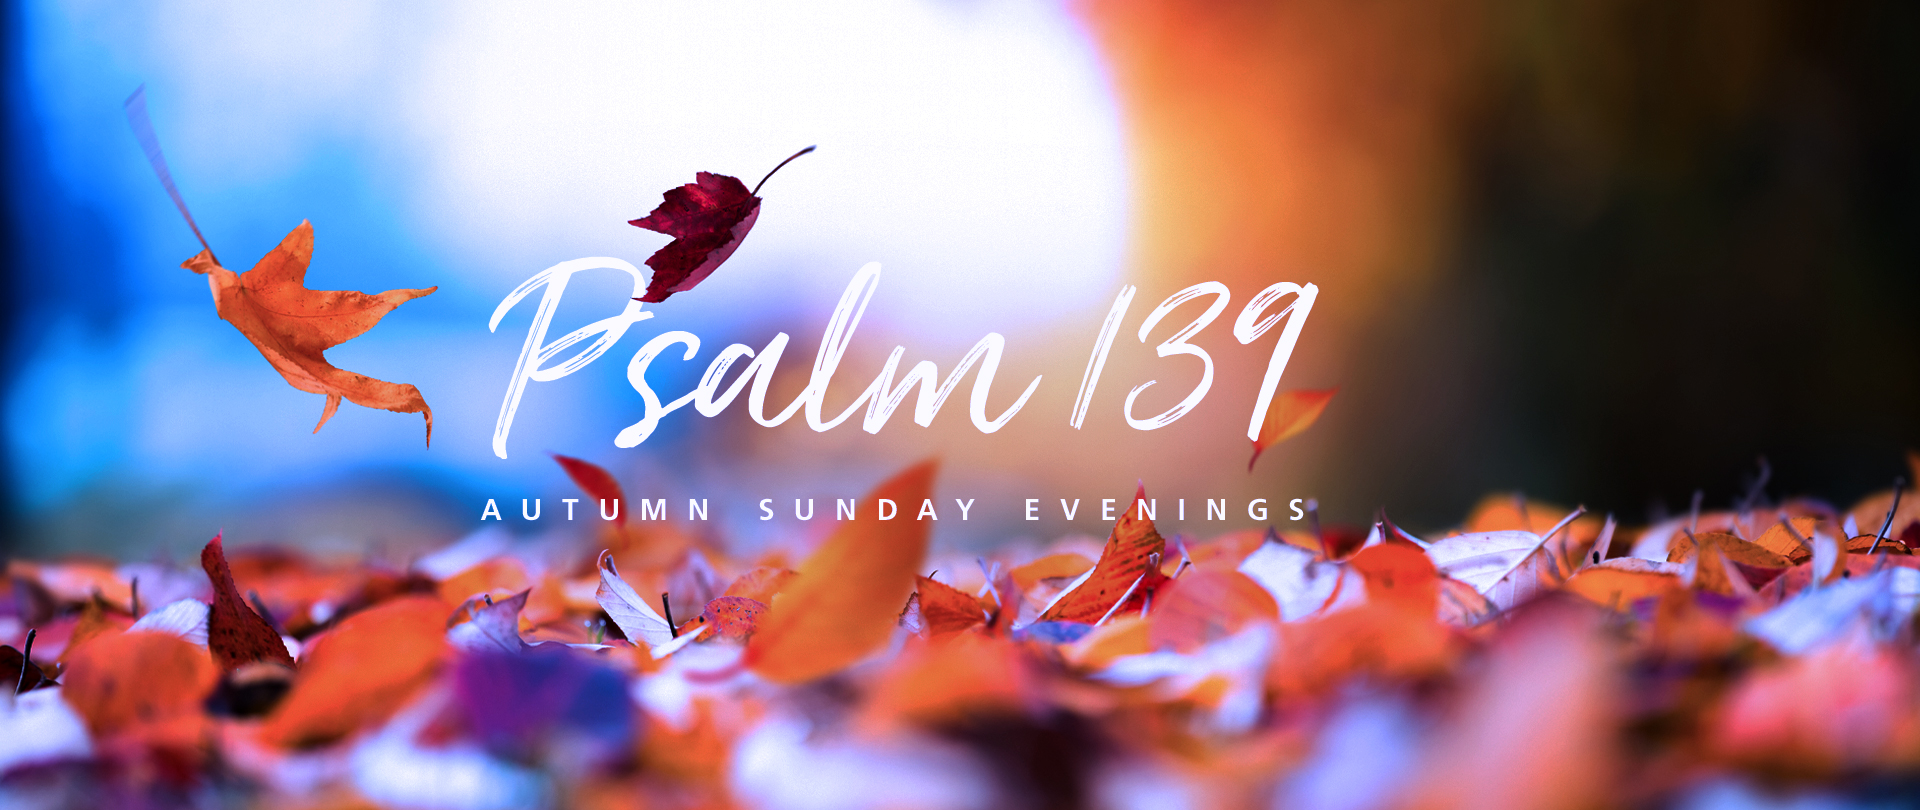 Psalm 139
Selected Sundays at 6:00 PM
Join us on November 5
